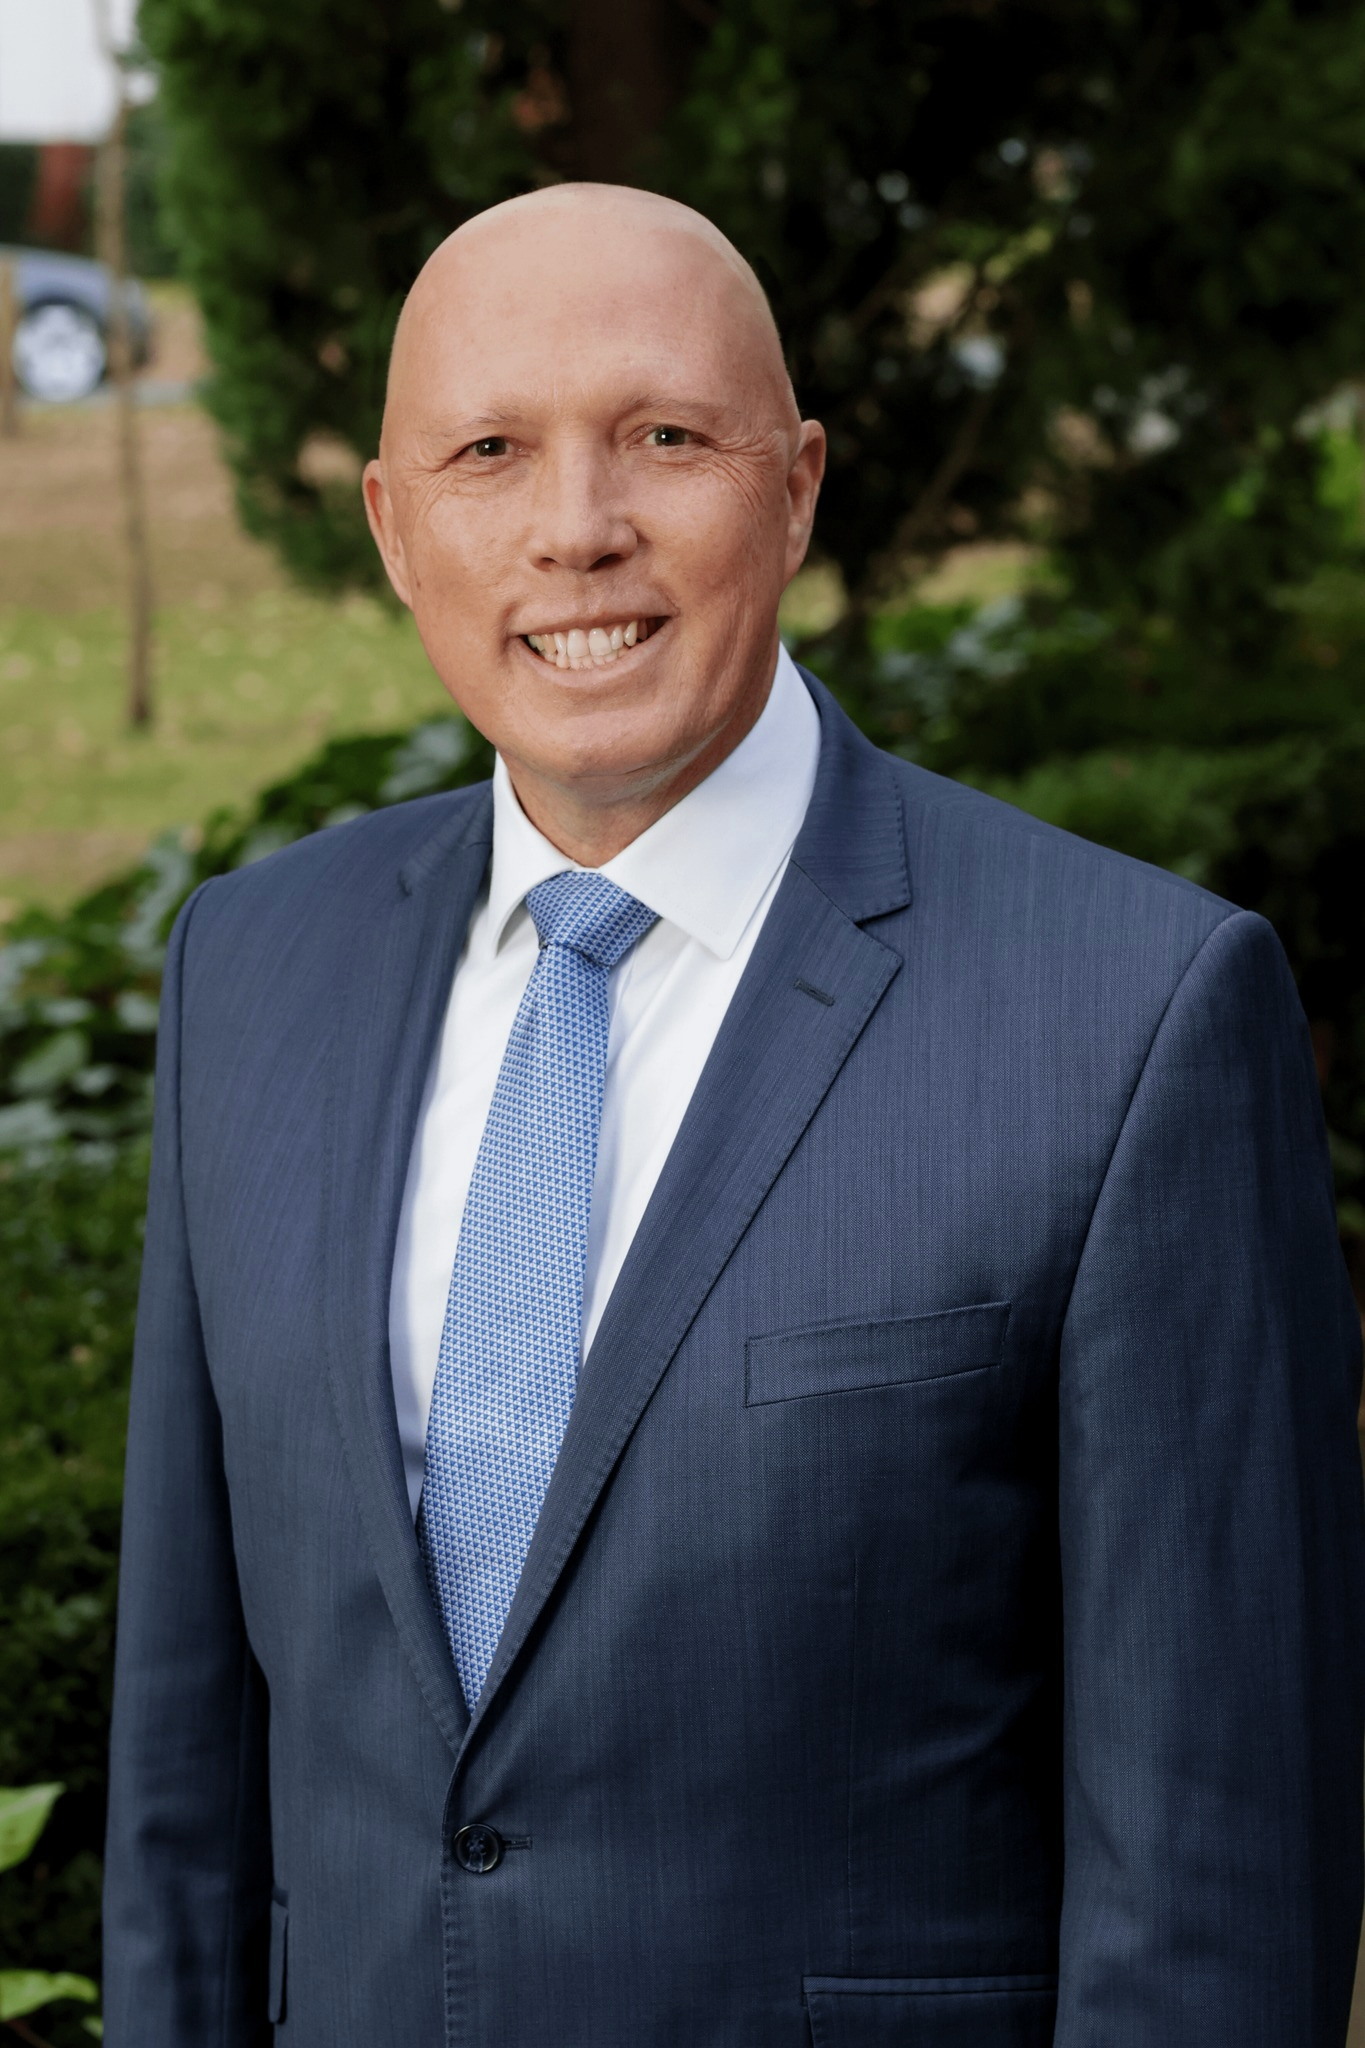 Peter Dutton poised to announce Qld locations for proposed nuclear power stations